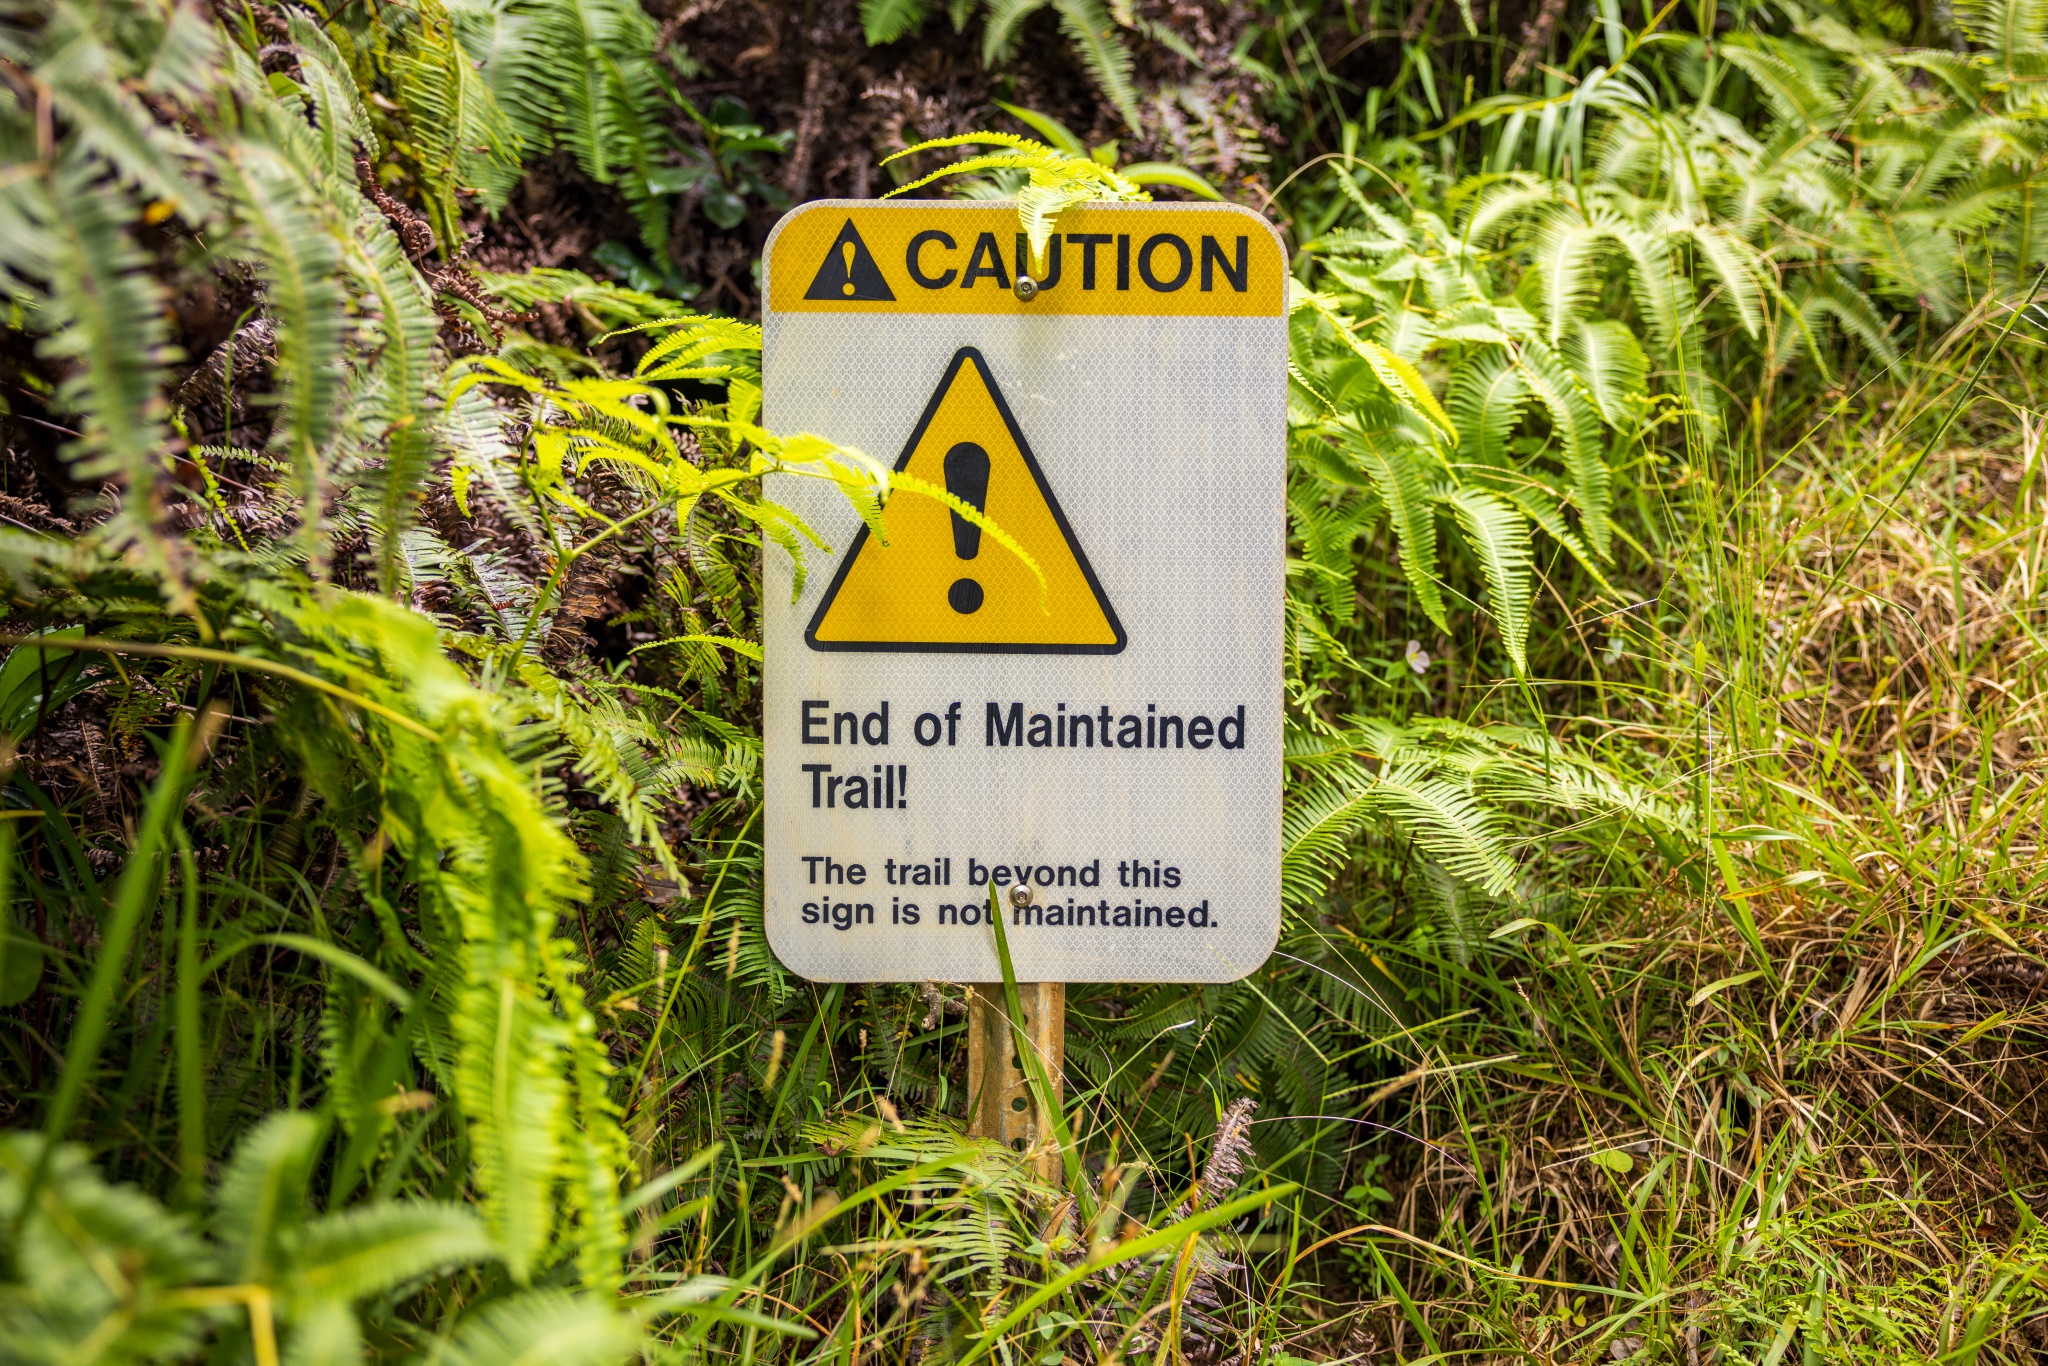 A caution sign that reads 'End of Maintained Trail!'.